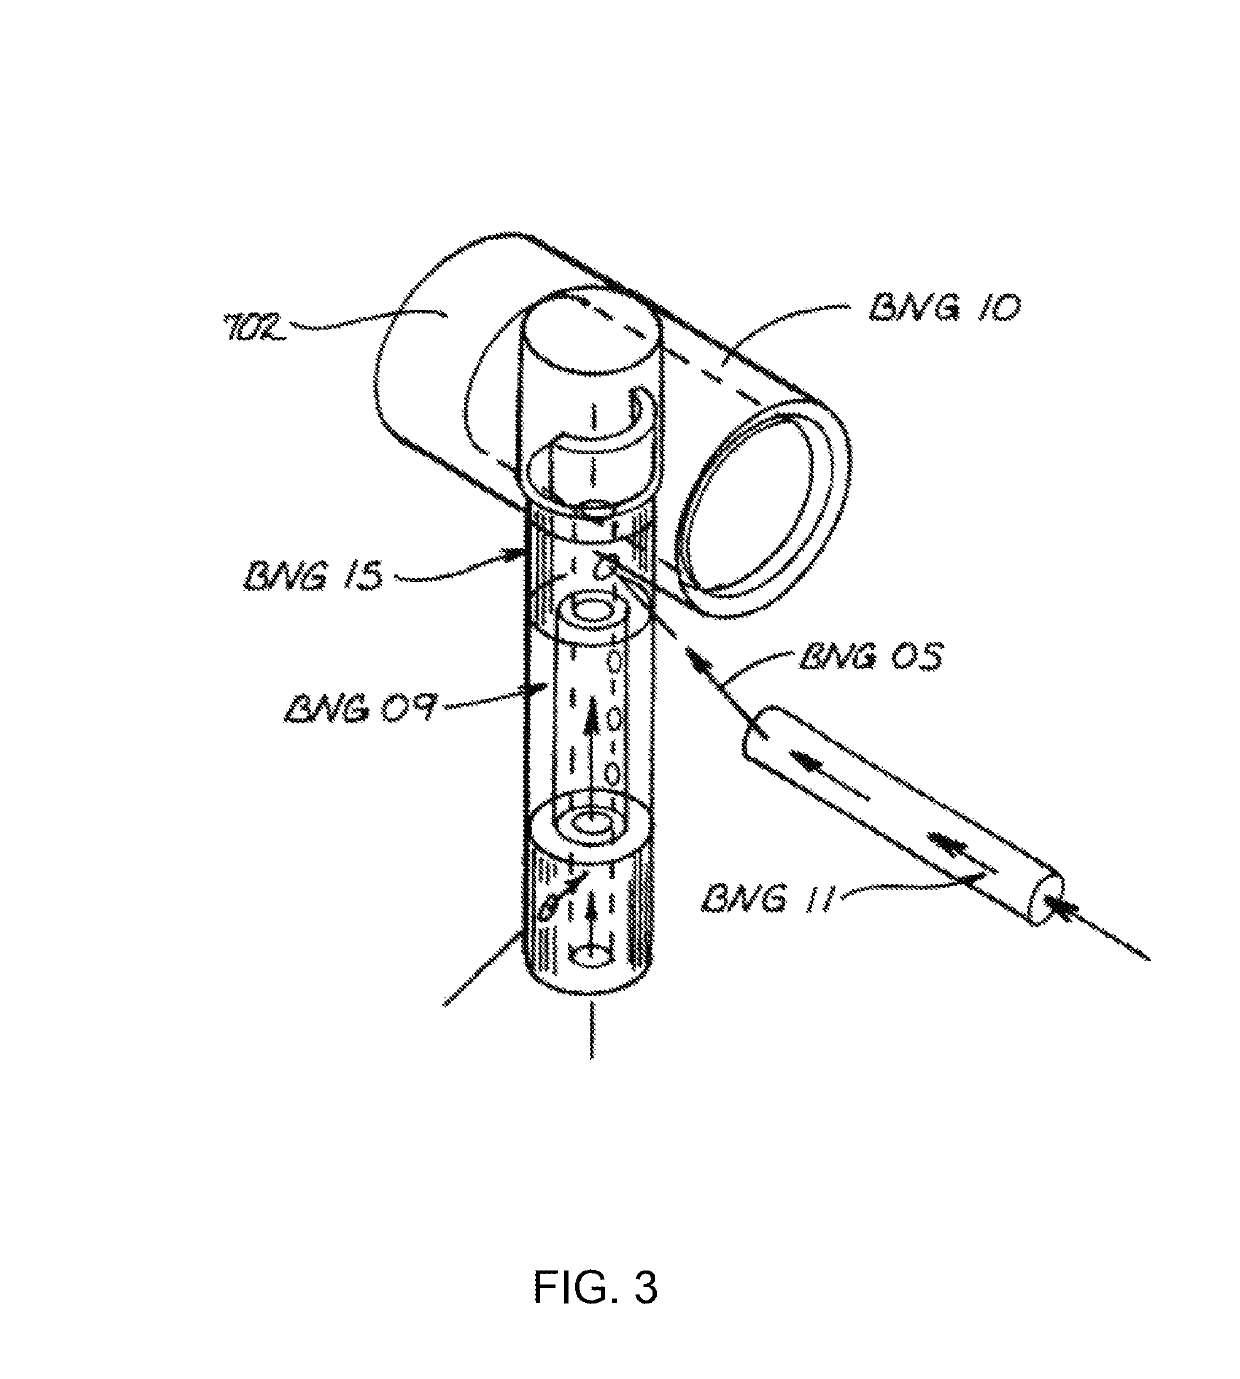 Fuel air delivery circuit with enhanced response, fuel vaporization and recharge